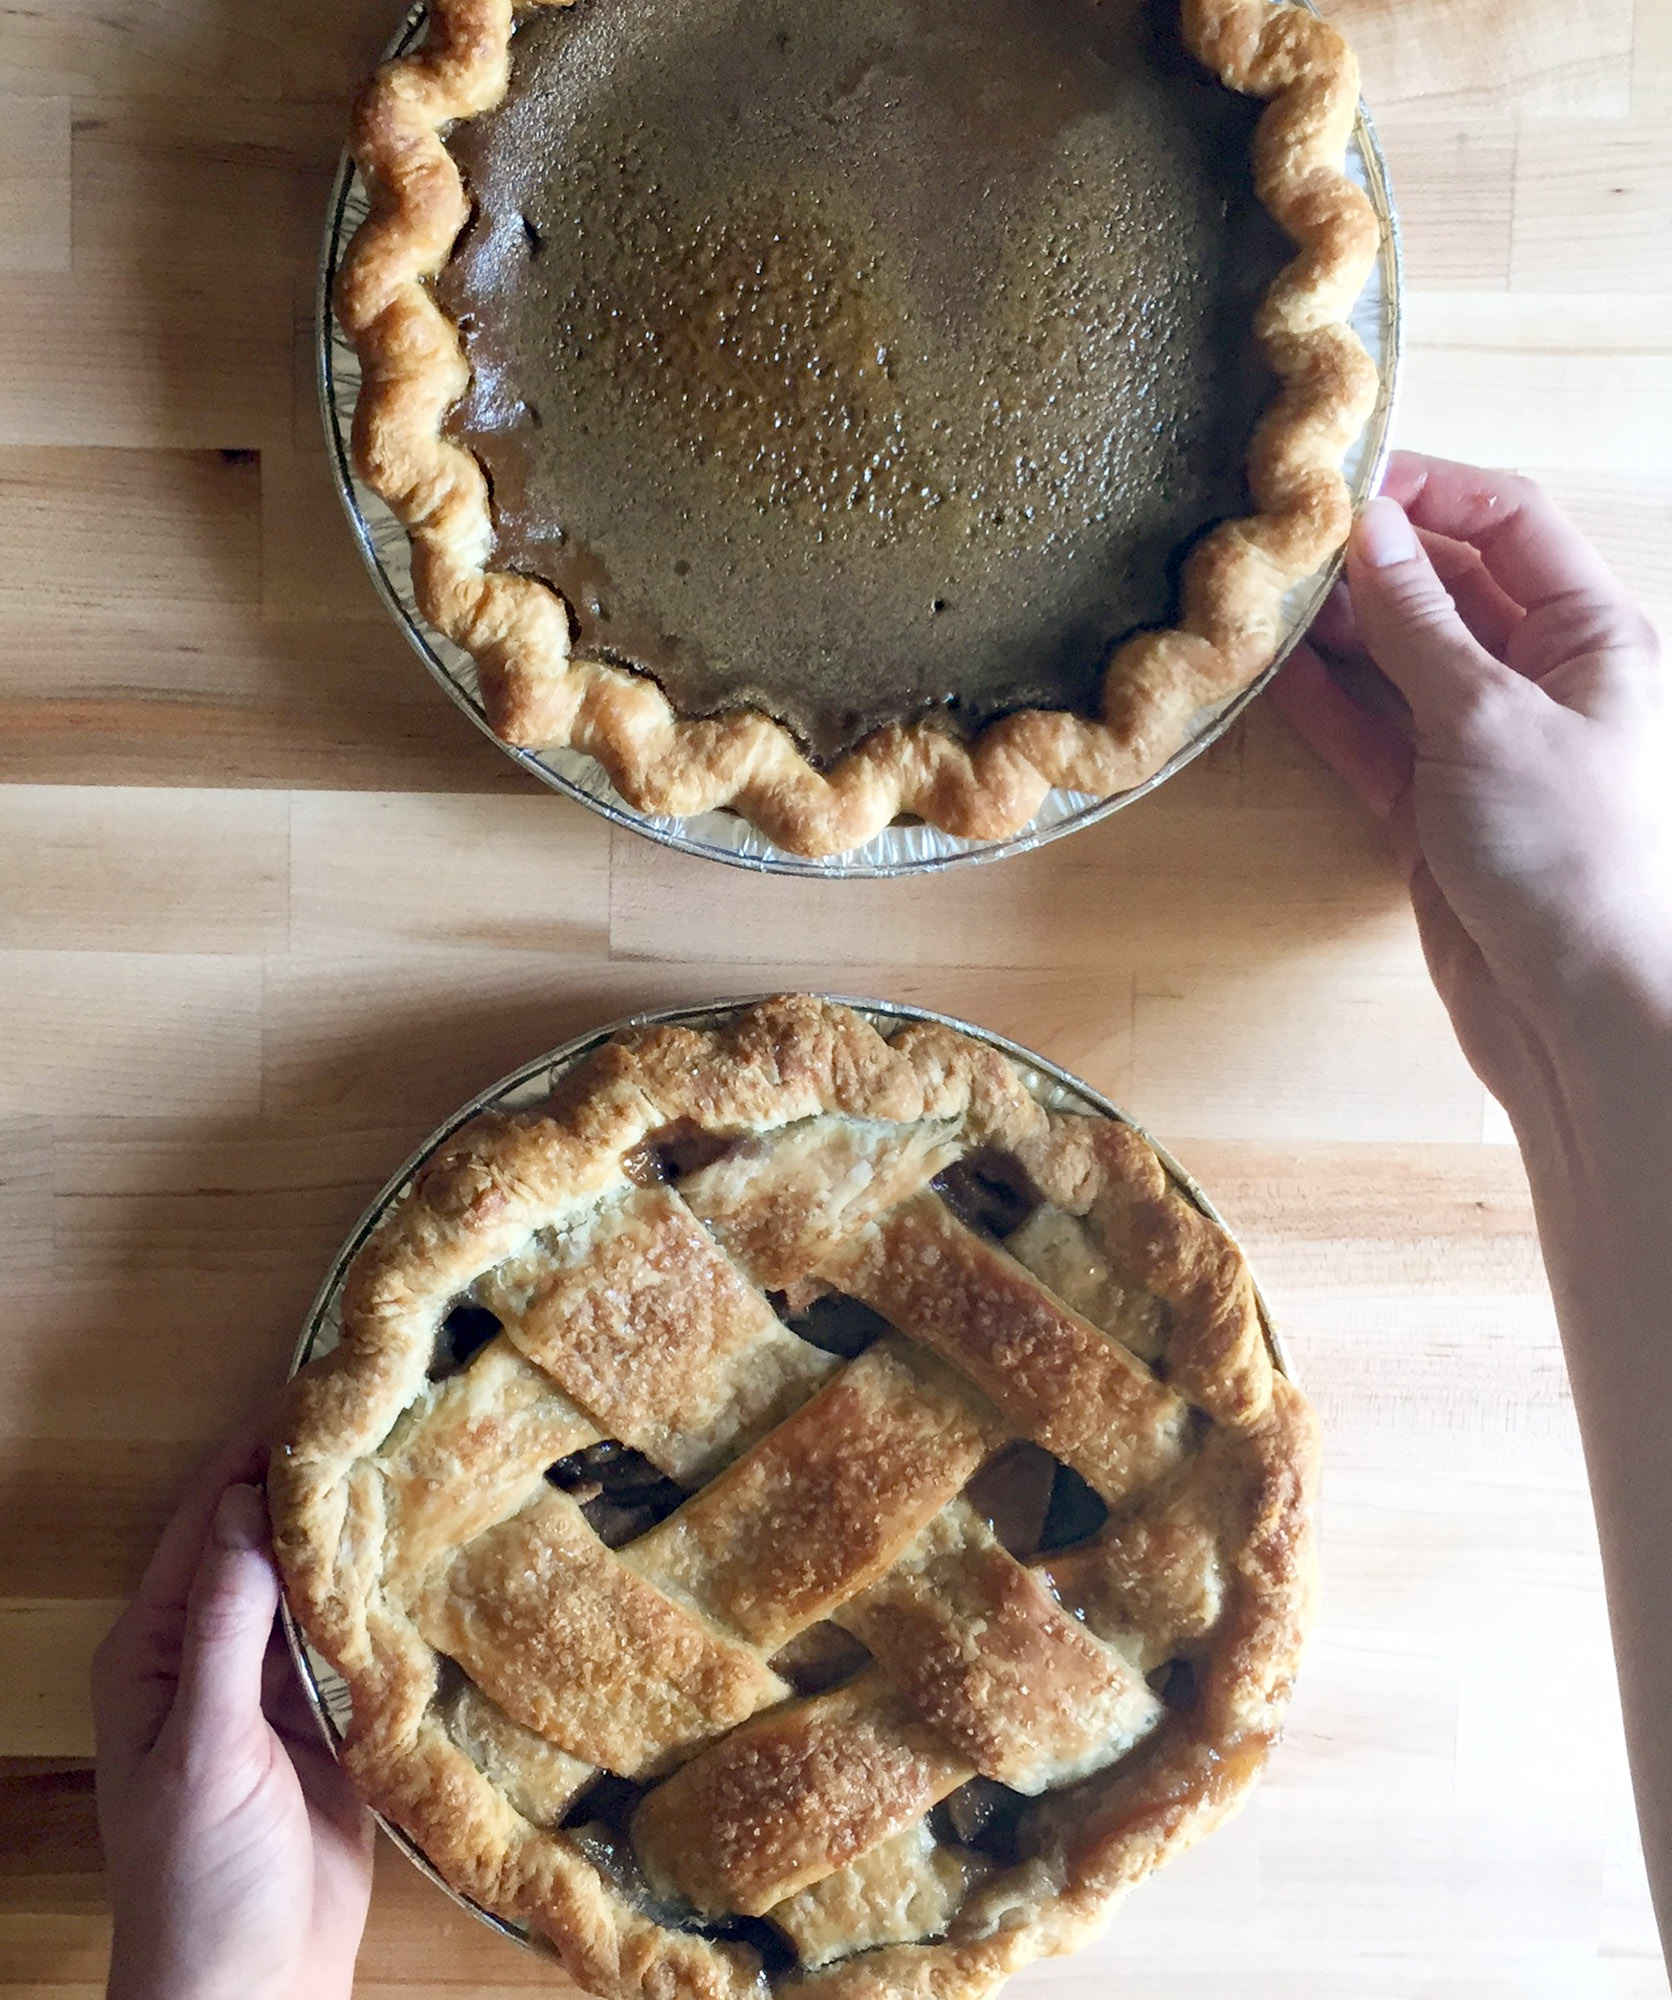 Ali Rubel in her home kitchen with two of her savory pies. (Photo by Ben Filippo)